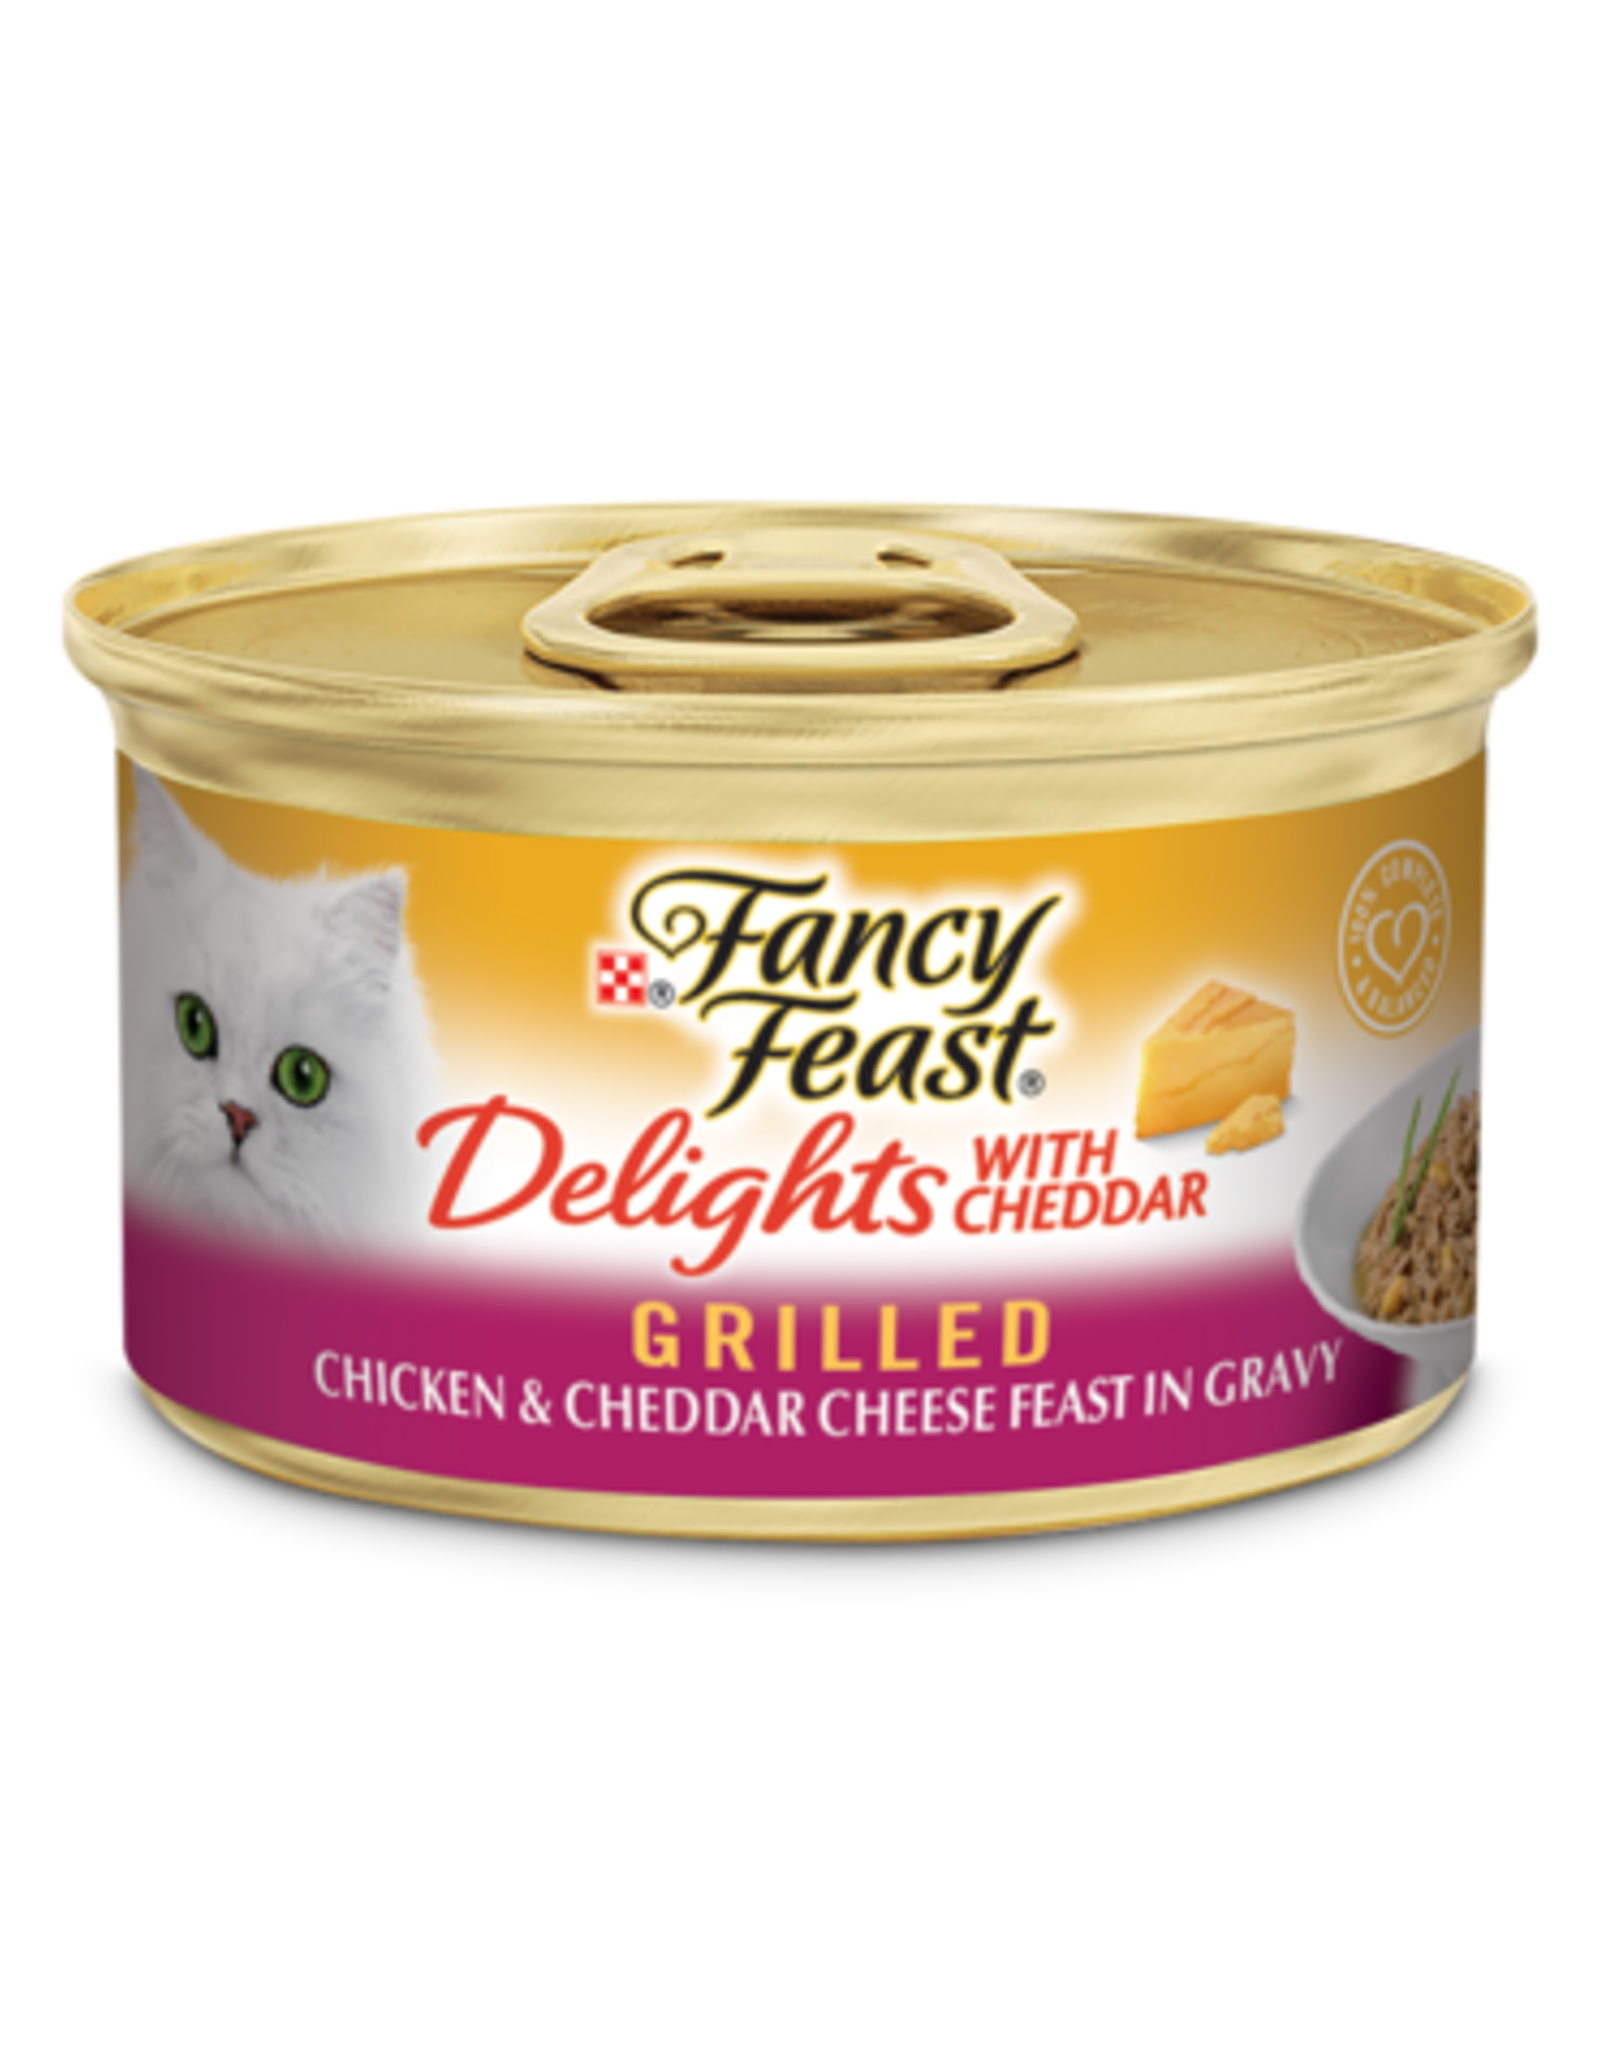 NESTLE PURINA PETCARE FANCY FEAST DELIGHTS CHICKEN & CHEESE 3OZ CASE OF 24